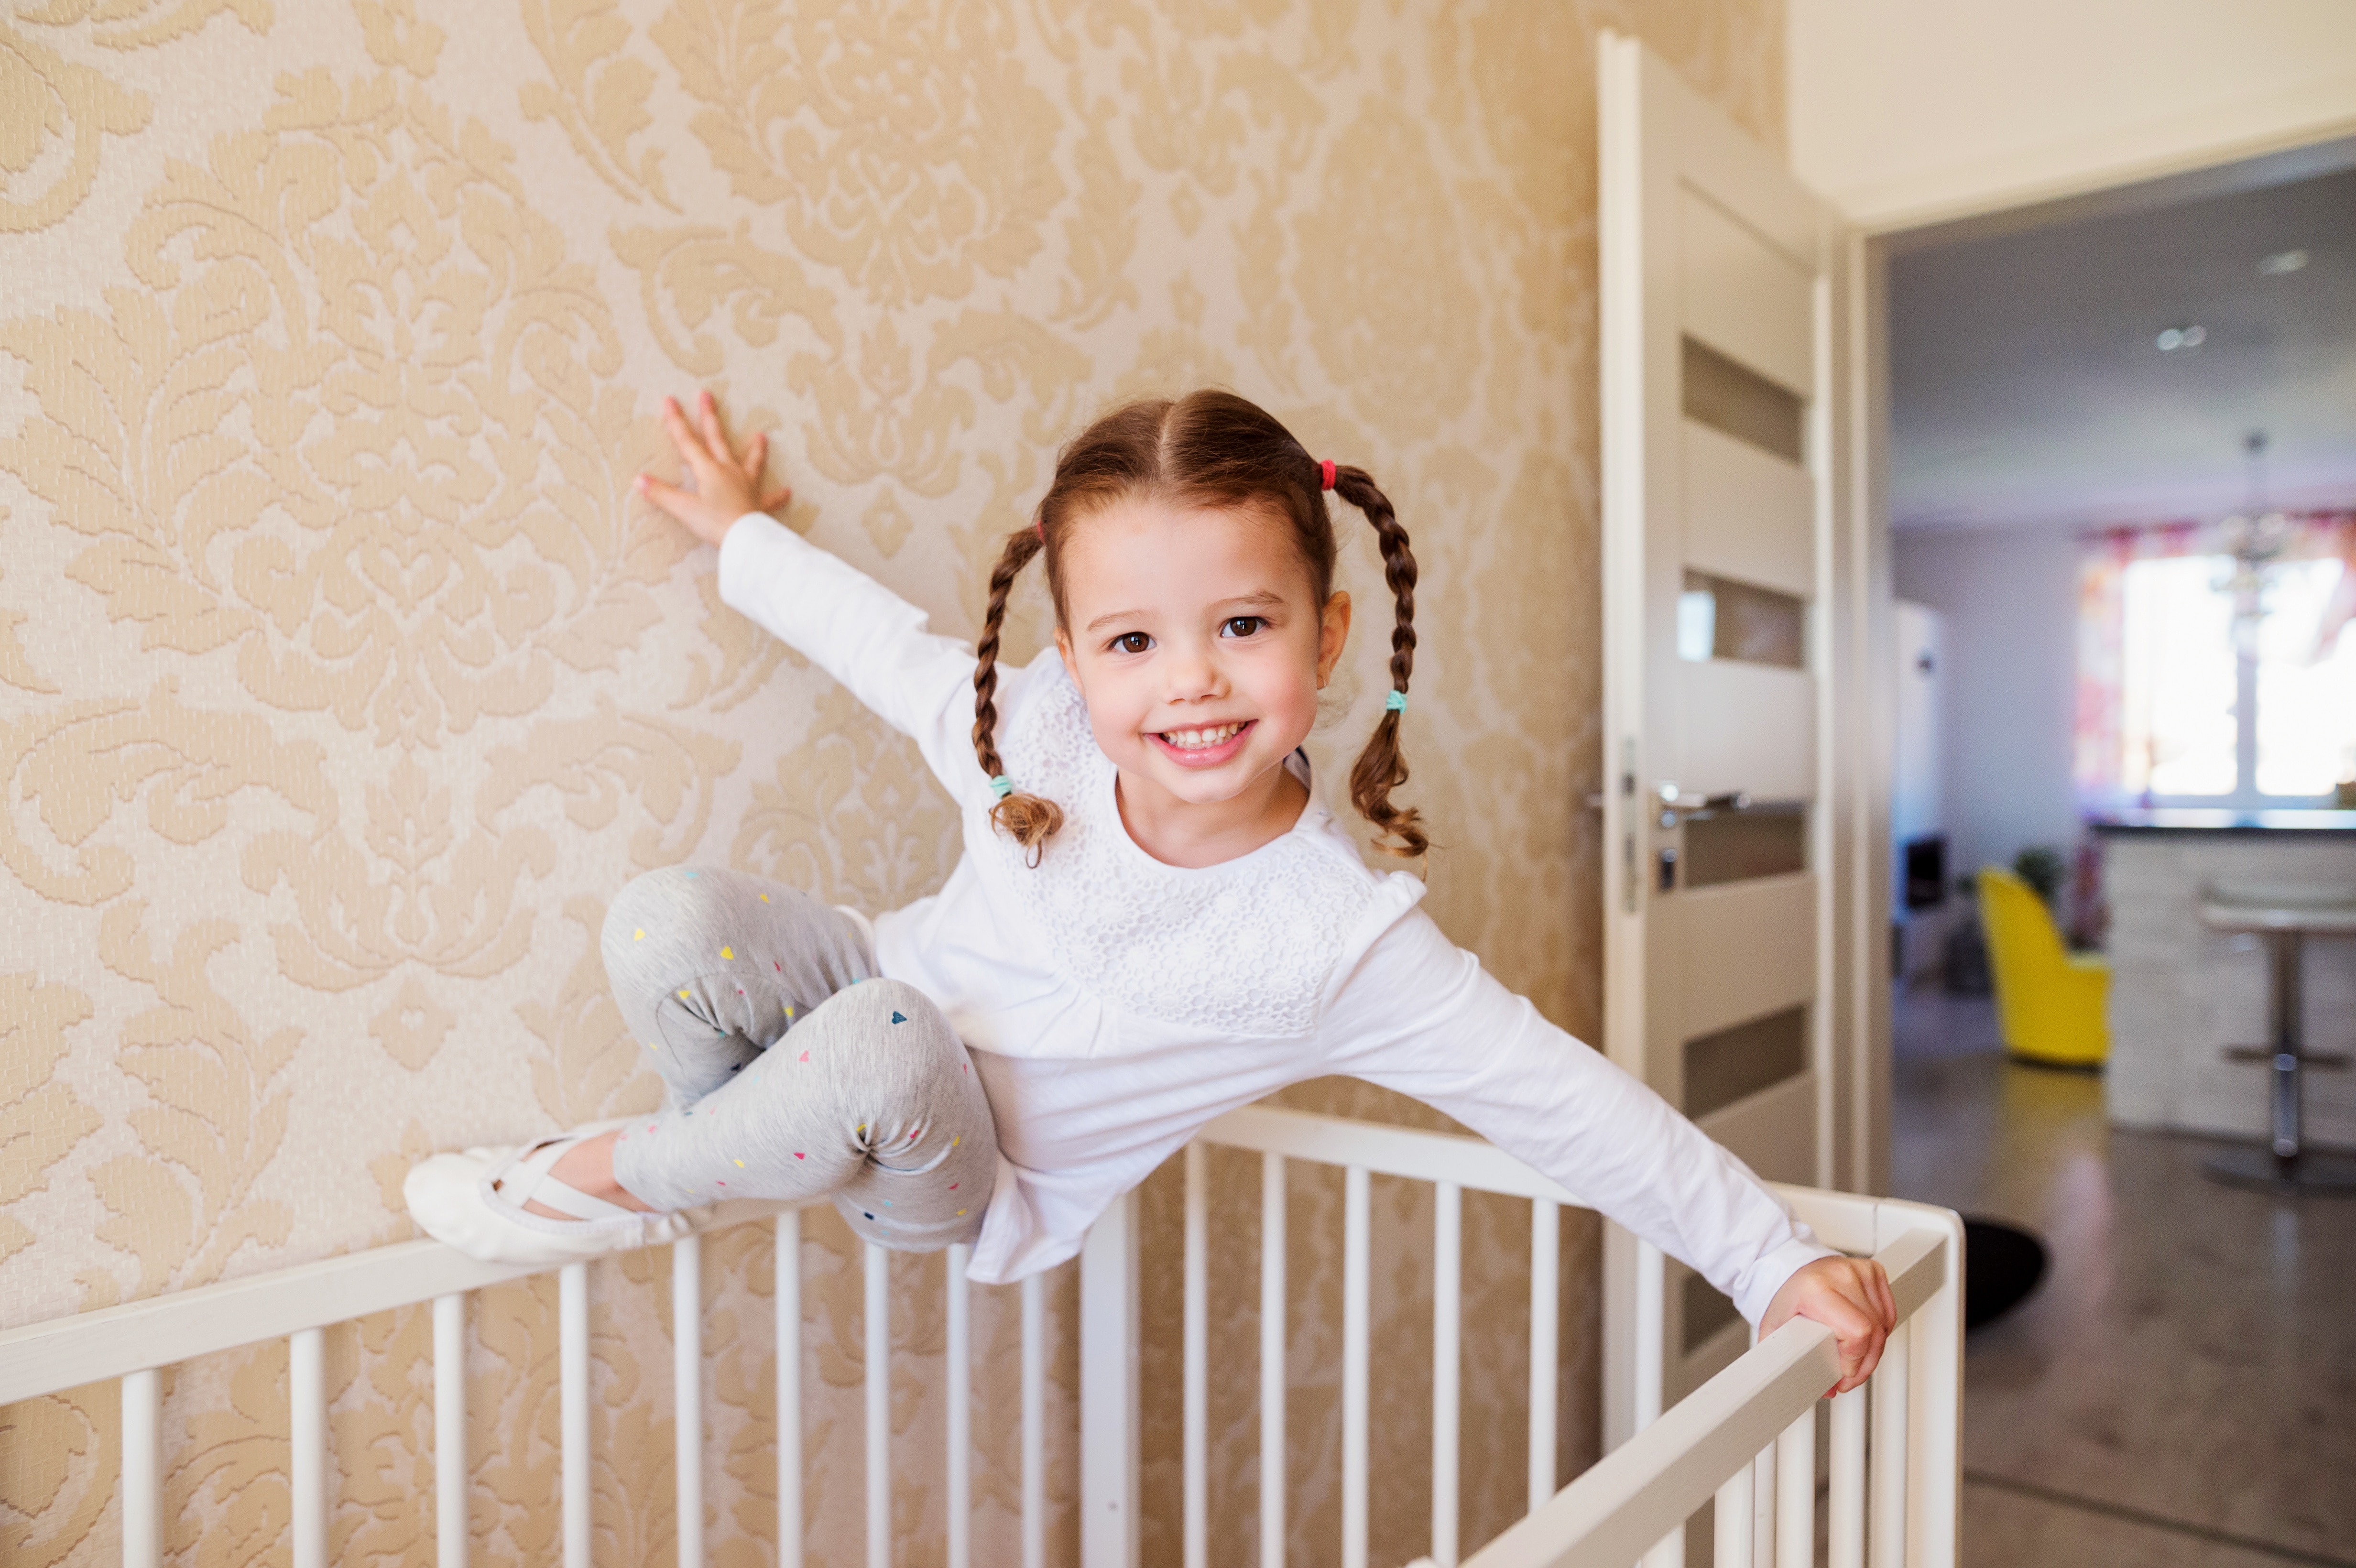 6 Top Tips If You Have a Crib Climber